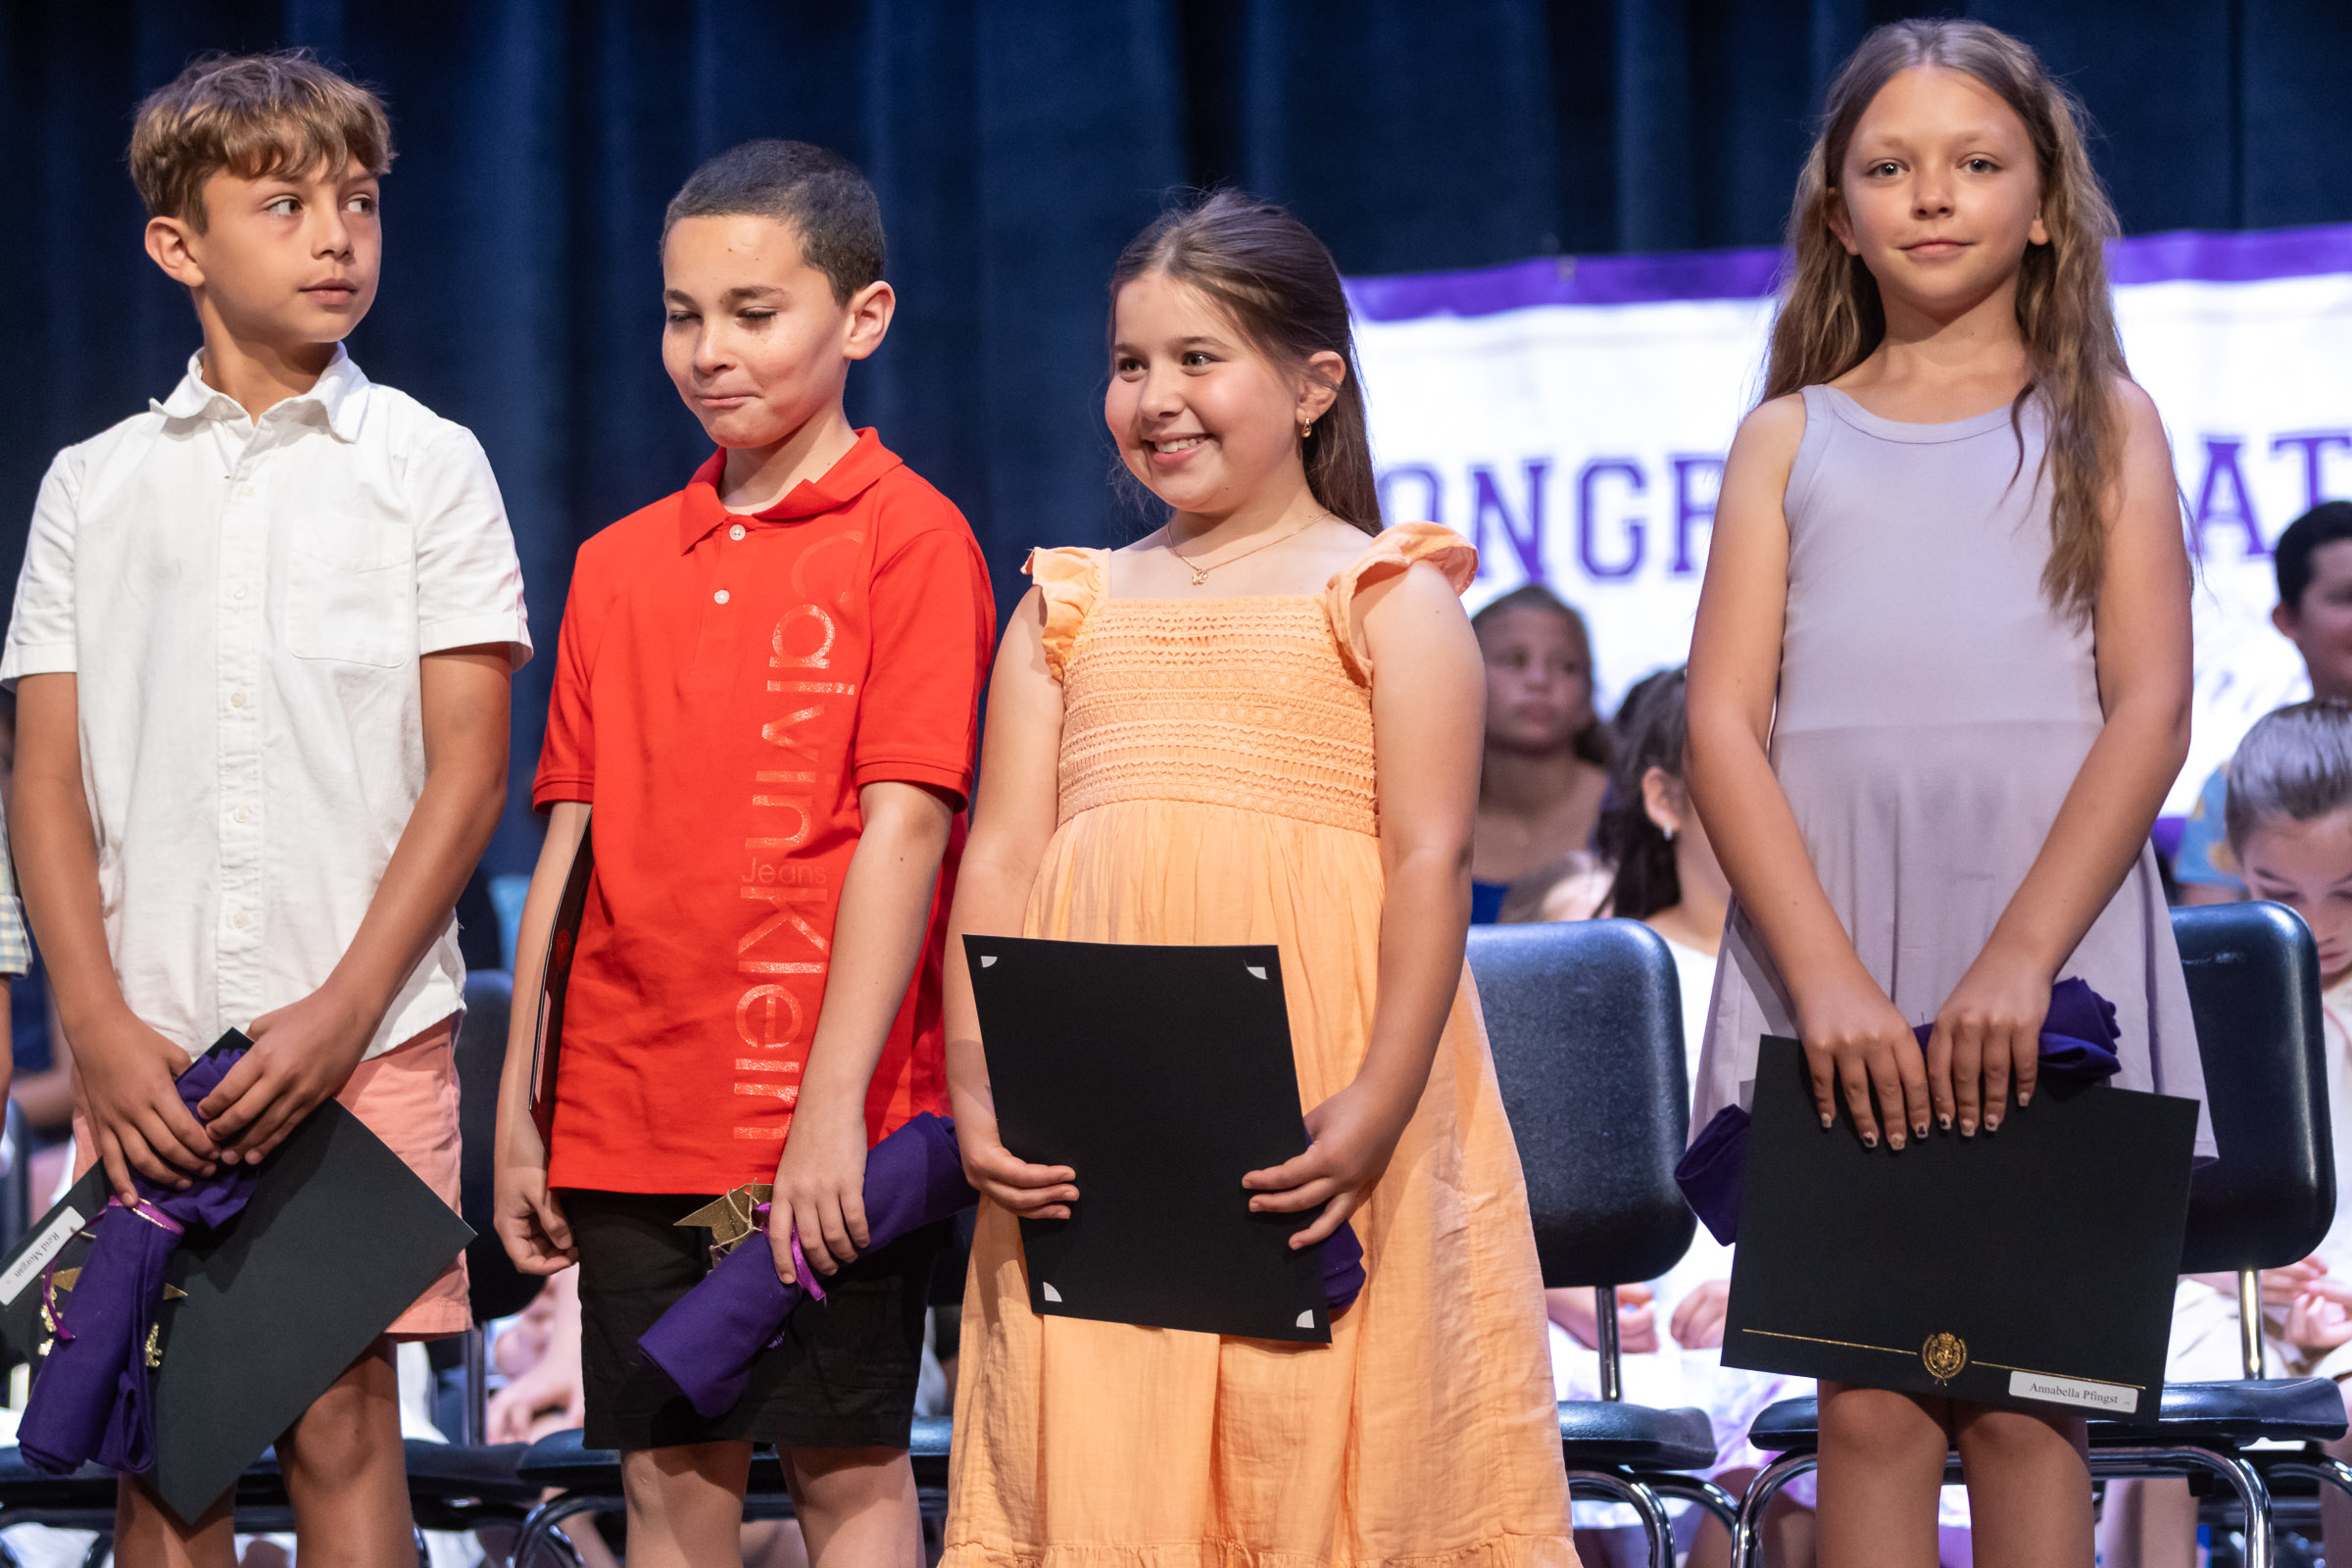 Students smile on stage during the Park Avenue Elementary School Fourth Grade Moving Up Ceremony in the WVHS auditorium